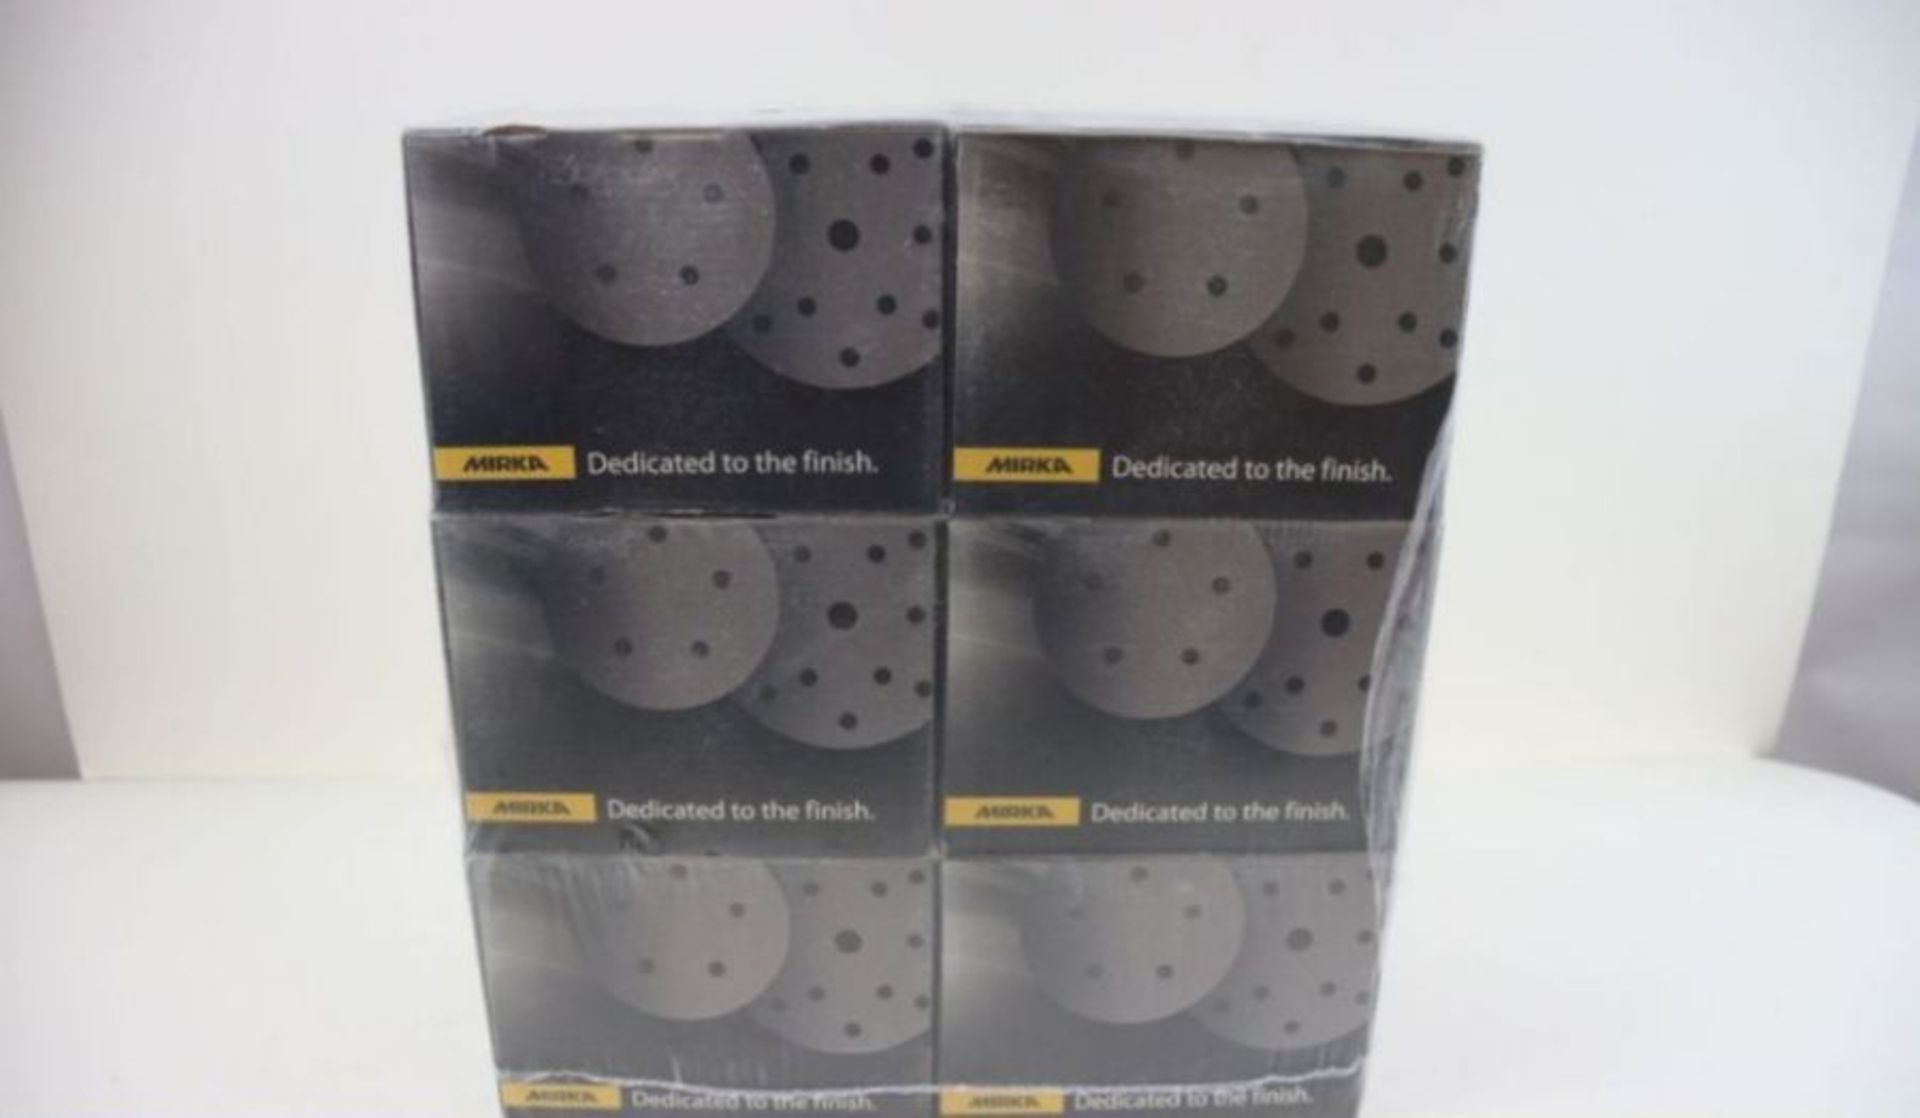 Six Boxes of 100 Mirka Basecut Velcr 17 Hole Sanding Discs 6 inch 150mm P120 Grit - Image 2 of 3